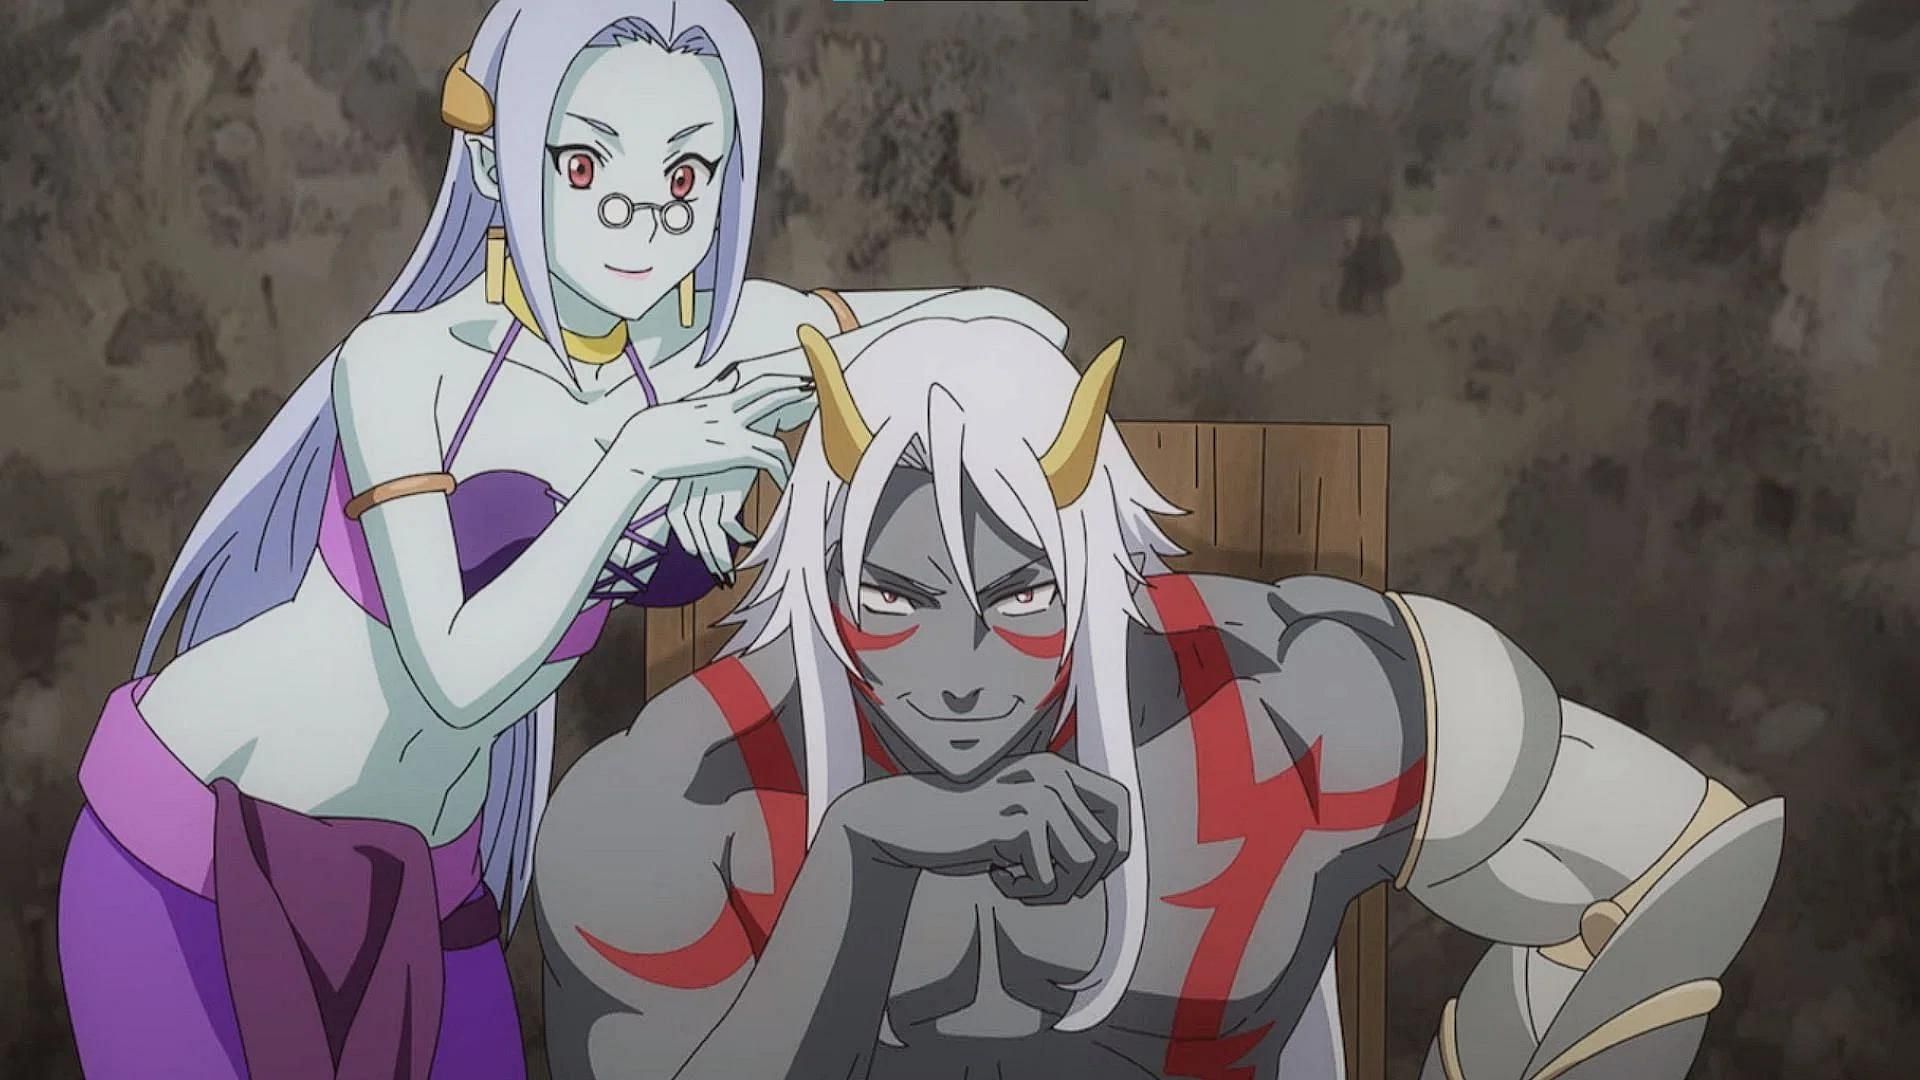 Gobrou and Gobmi as shown in the anime (Image via Studio Deen)